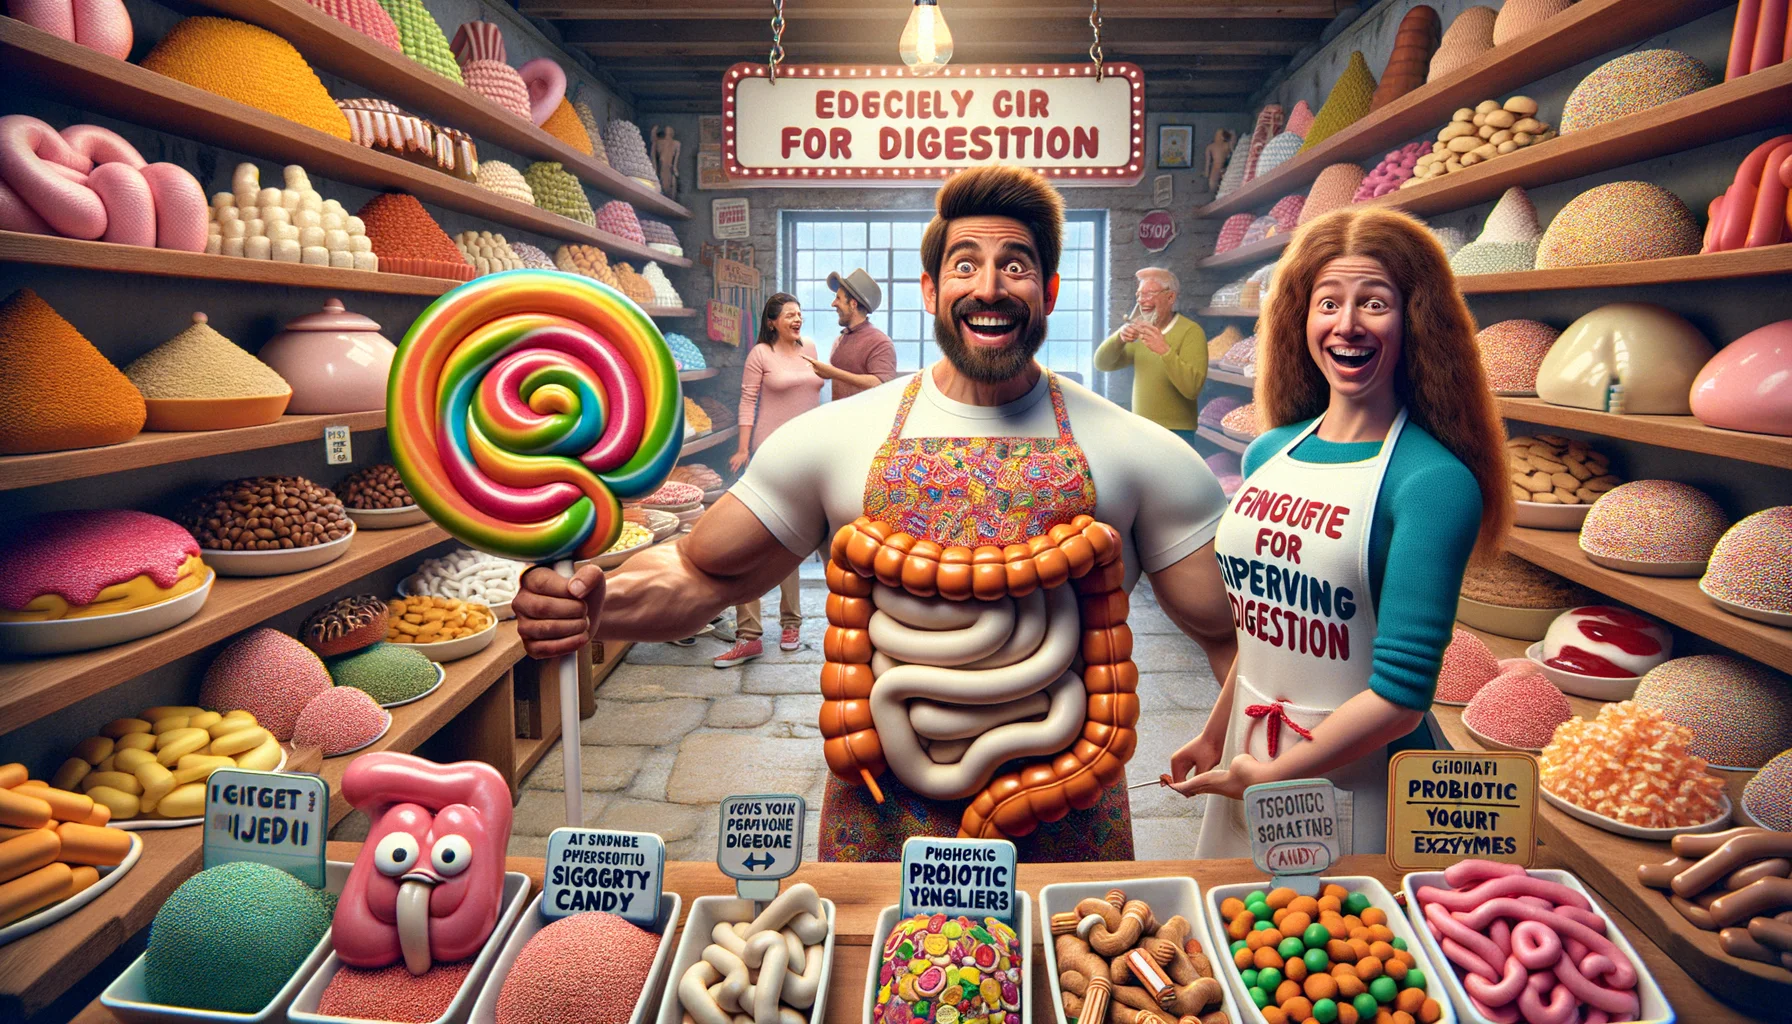 Imagine a humorous scene showing a dessert-themed shop, filled with edible sweets uniquely crafted for improving digestion. Inside, a joyous Caucasian male seller dressed in a colorful apron is presenting an oversized ginger candy, known for its digestion-friendly properties. In the foreground, a funny Hispanic woman, full of excitement, holding a gigantic probiotic yogurt-flavored lollipop in her hands. On the shelves, arrays of colorful sweets, all humorously shaped like stomachs, intestines, and digestive enzymes with signs boasting their benefits for digestion. To make it even more realistic, also include customers with different descents and genders amusingly inspecting the sweets.